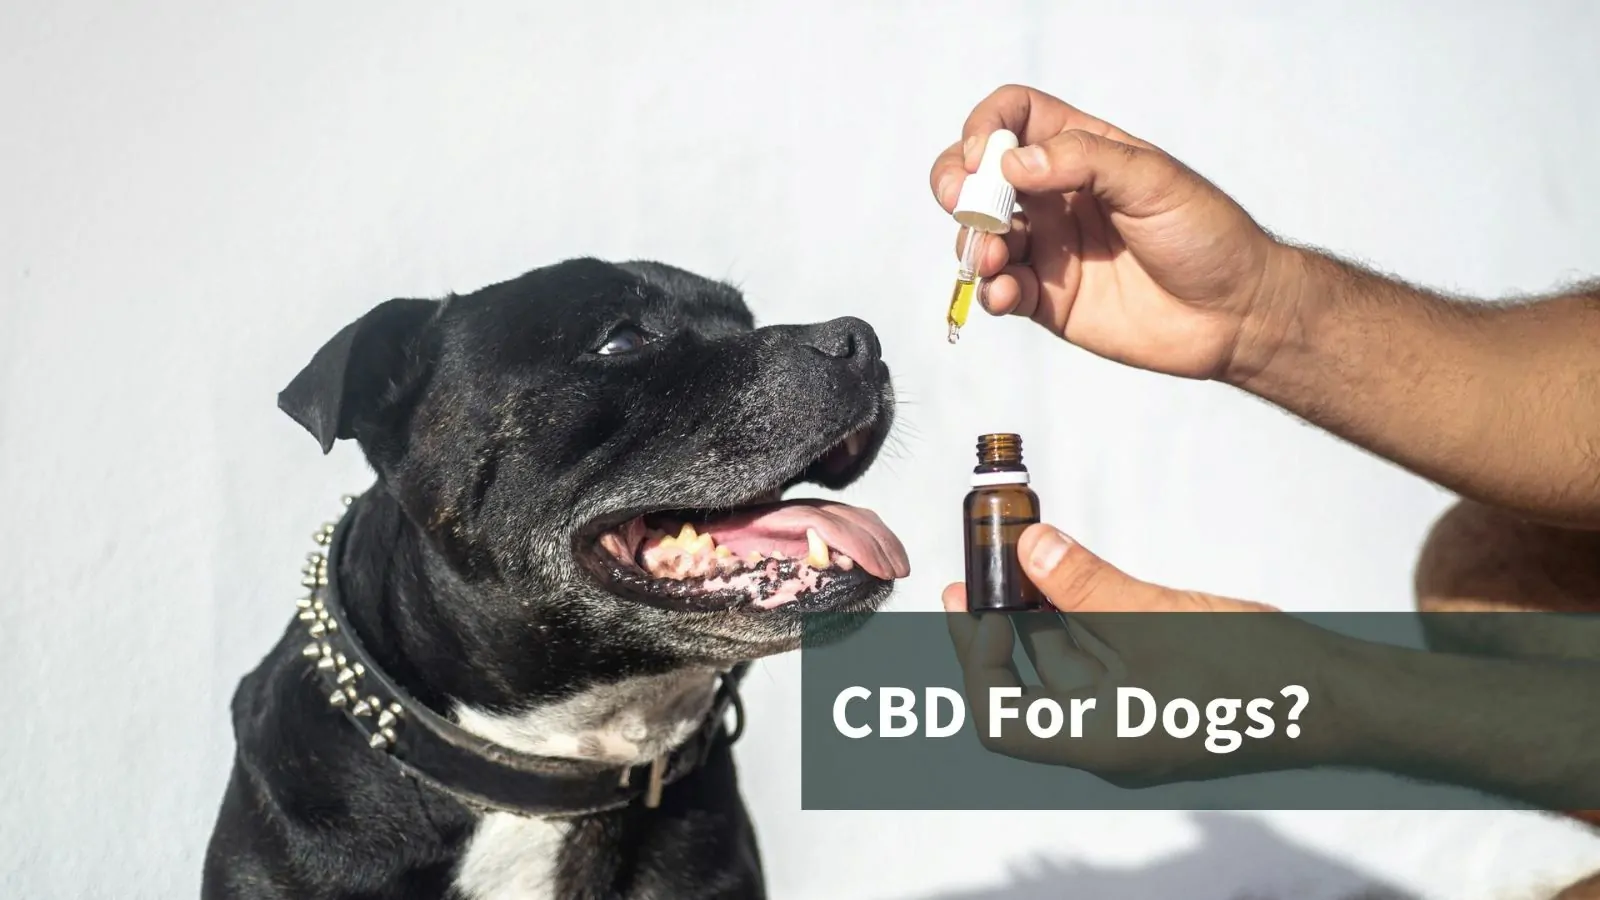 CBD for Dogs: What Is It And What Does It Do?